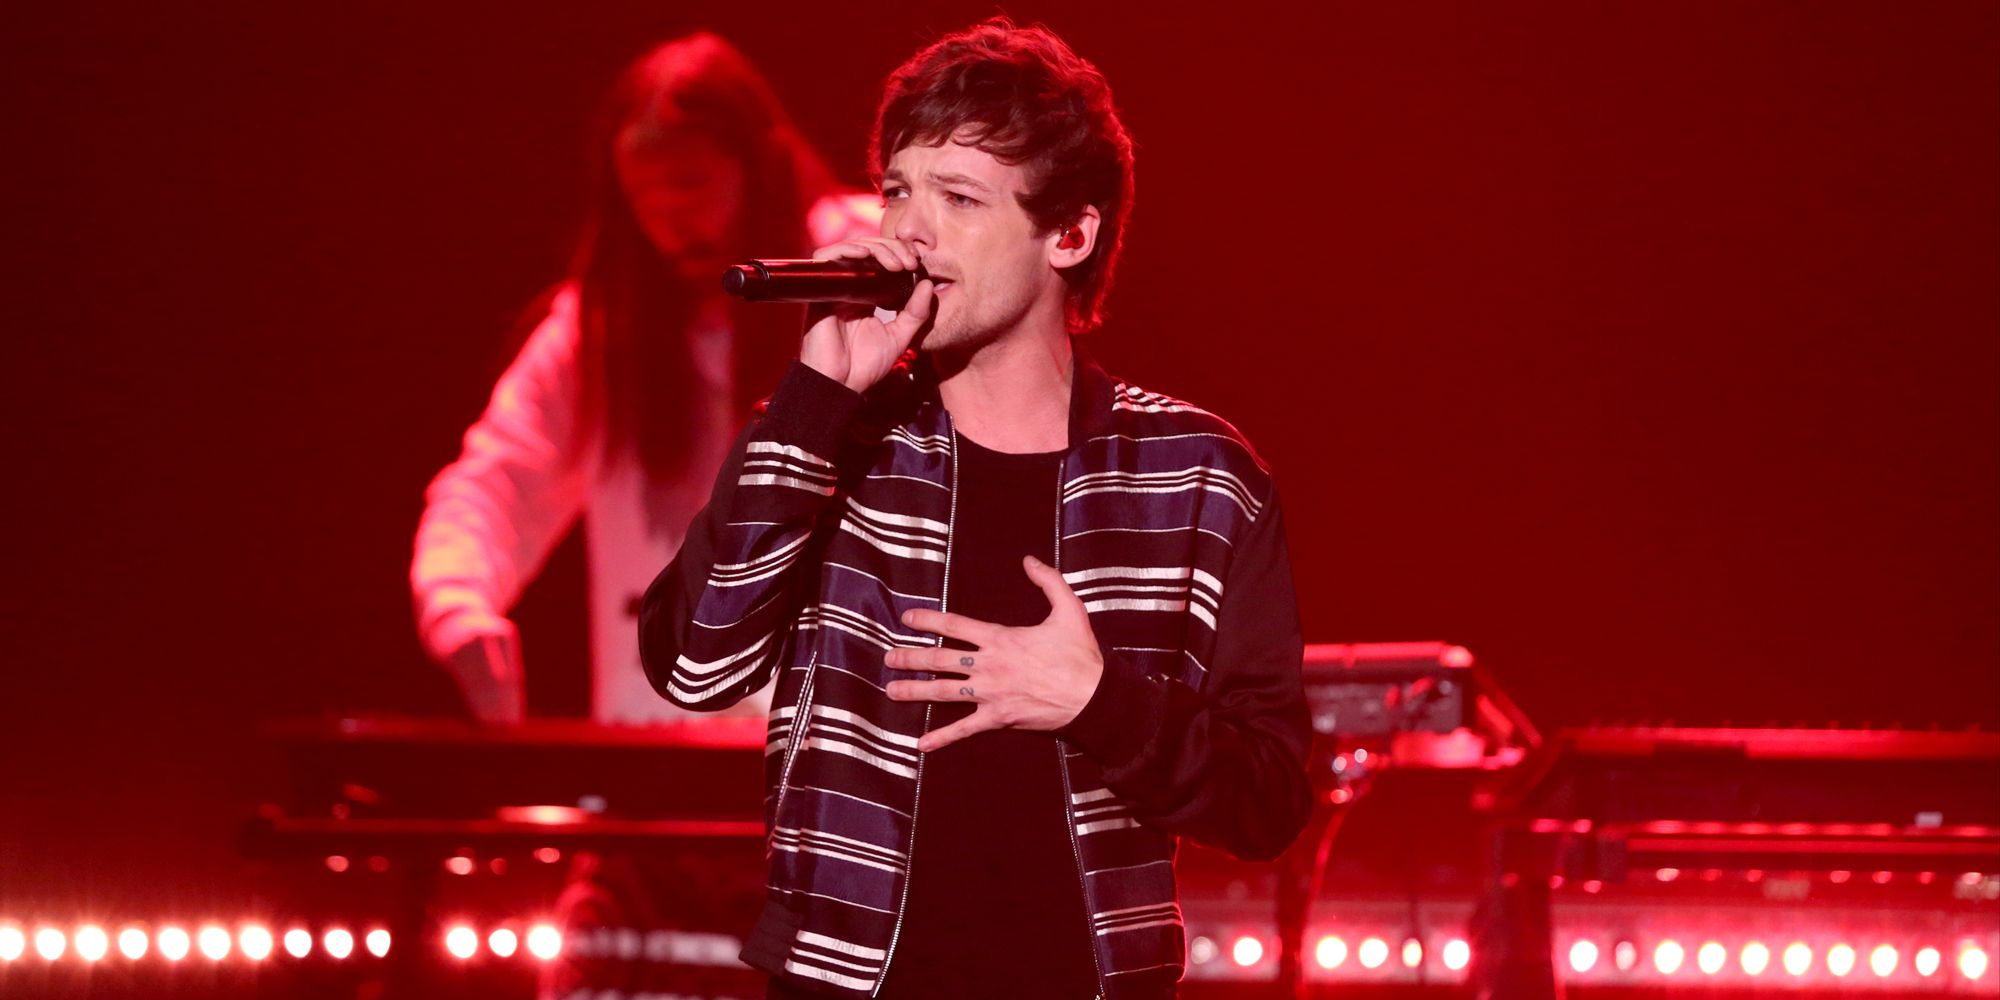 Louis Tomlinson of One Direction performs live during the X Factor Live  tour, at Wembley Arena, London. EDITORS PLEASE NOTE: Editorial use only, no  merchandise, no use after July 10, 2011. Further